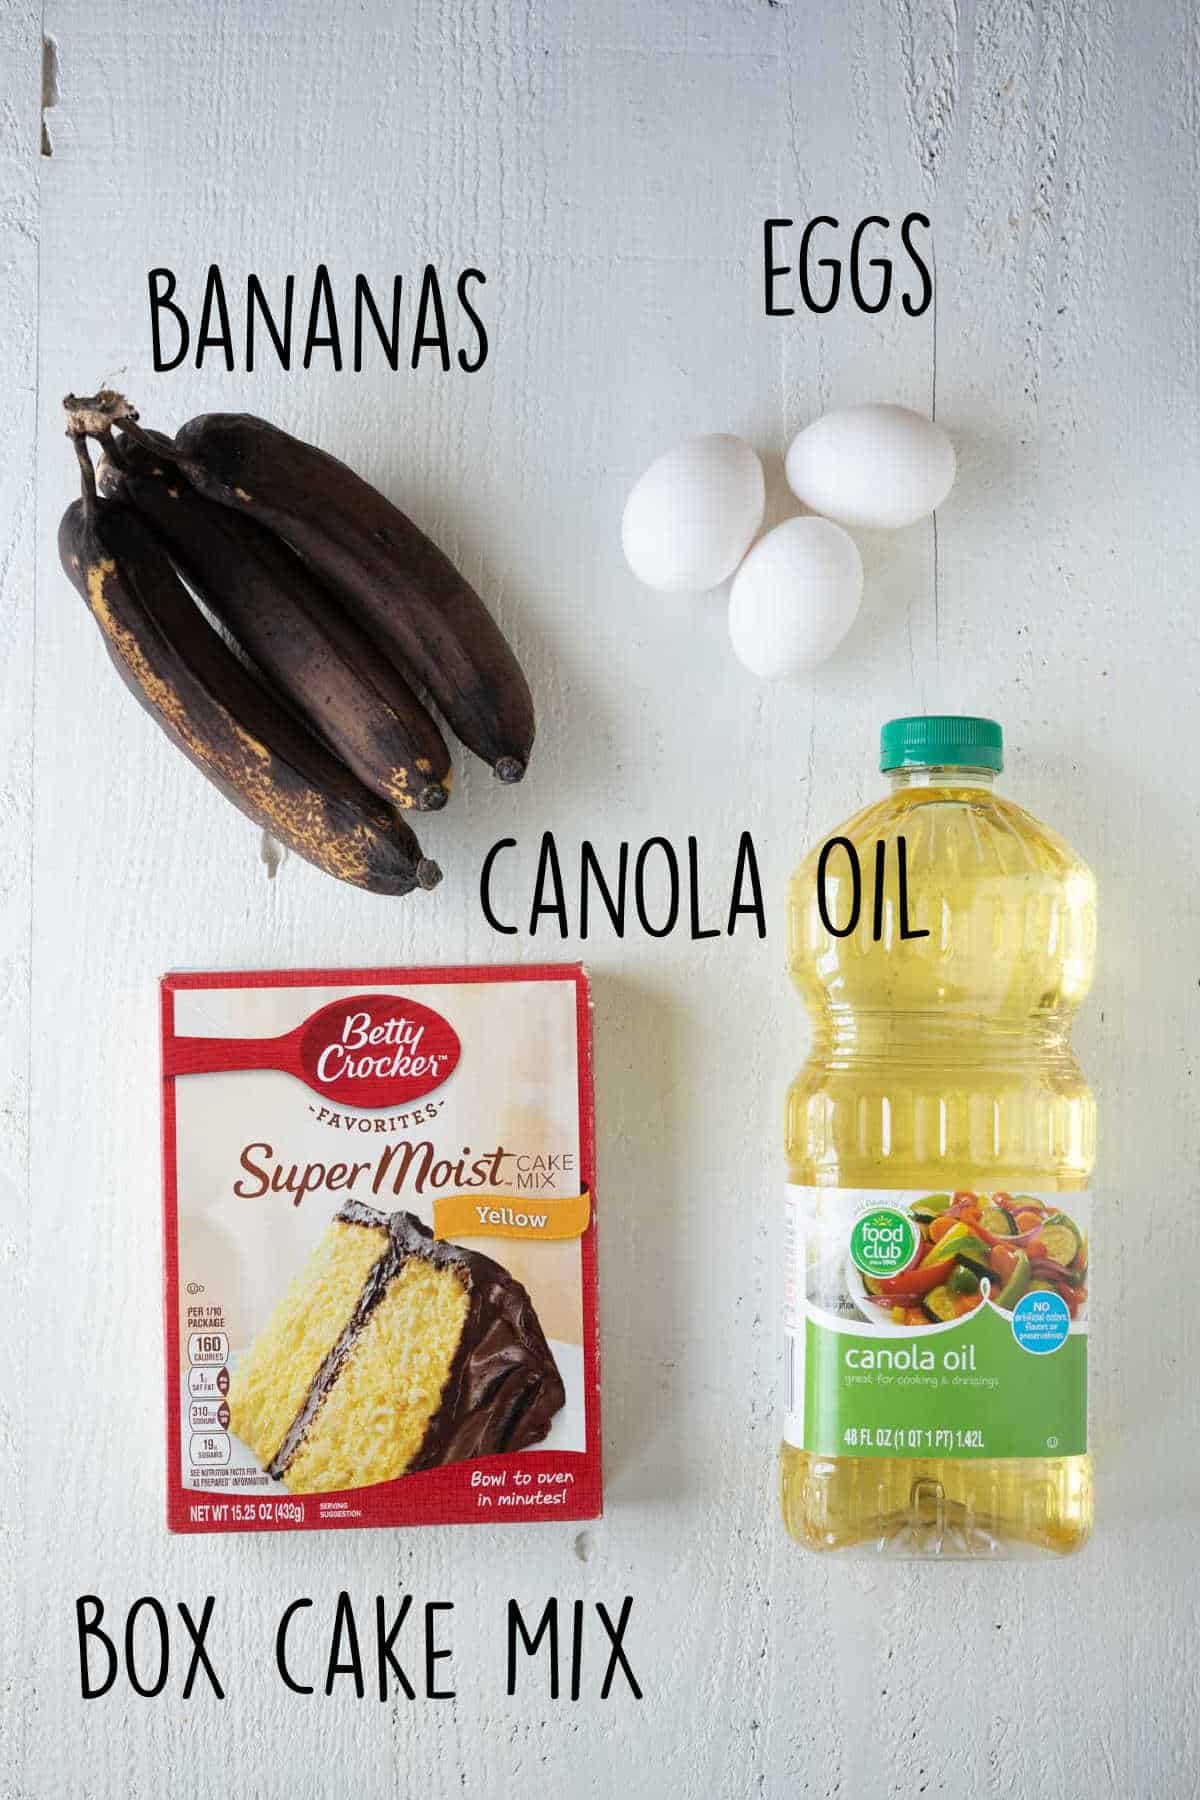 Ingredients to make banana bread with a cake mix.